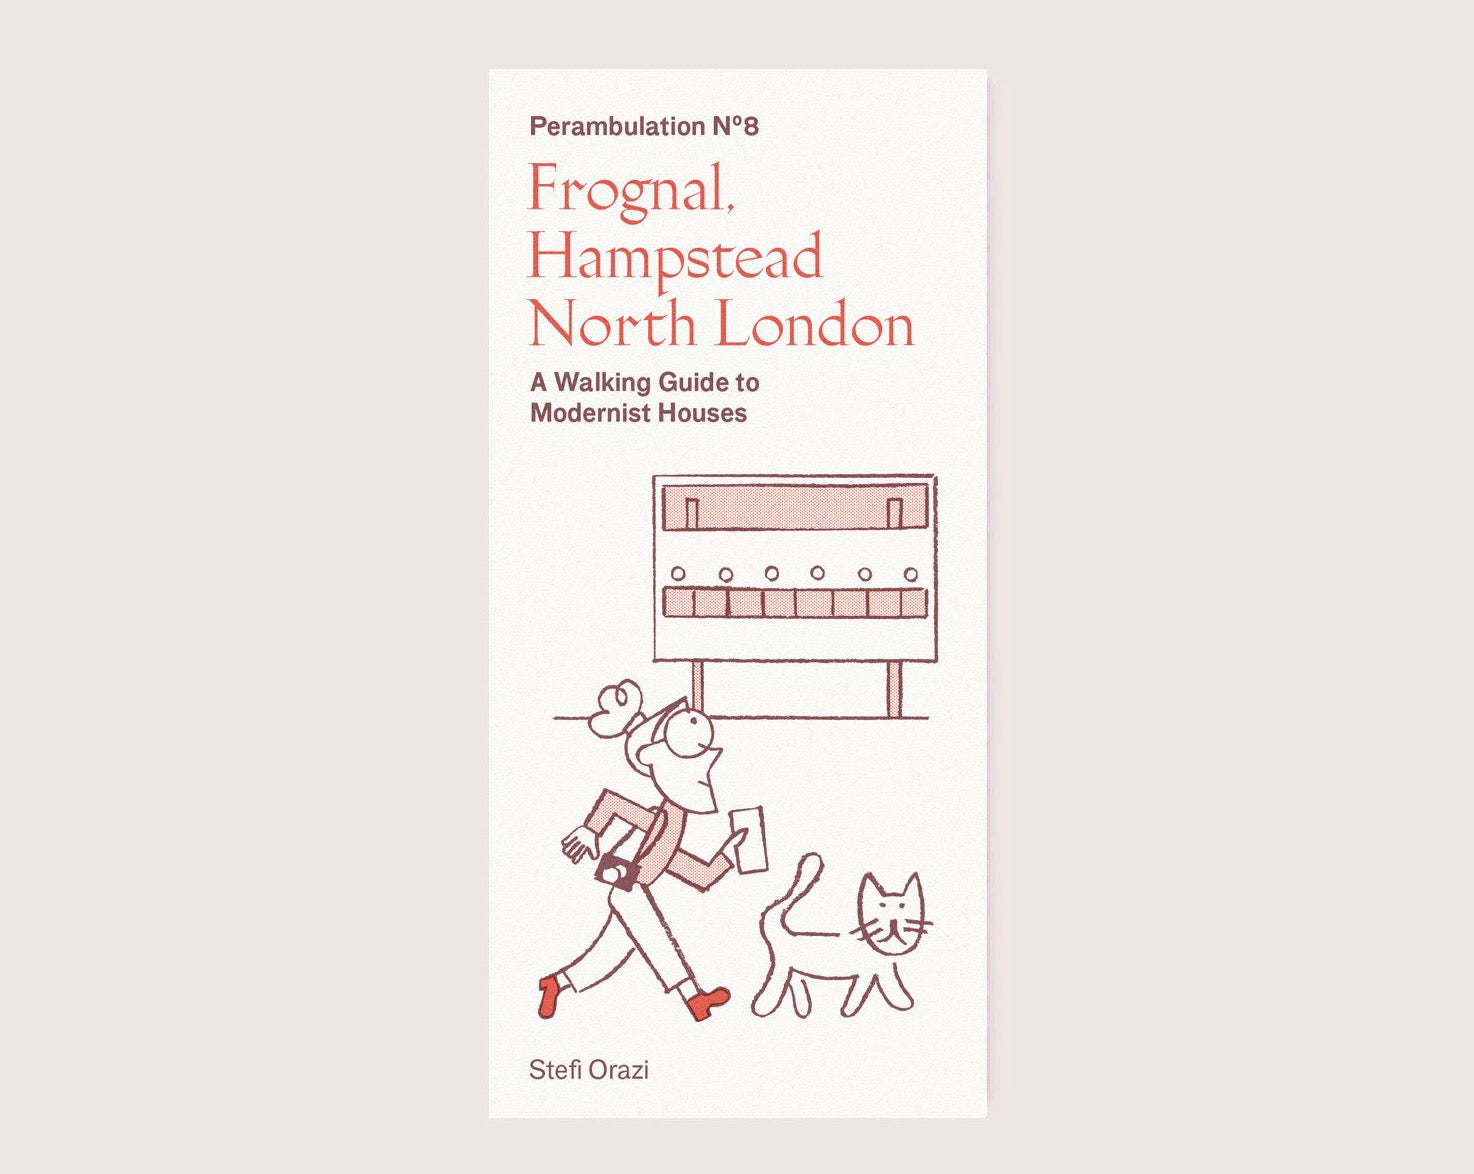 Perambulation Nº8—A Walking Guide to Modernist Houses in Frognal, Hampstead in North London by Stefi Orazi